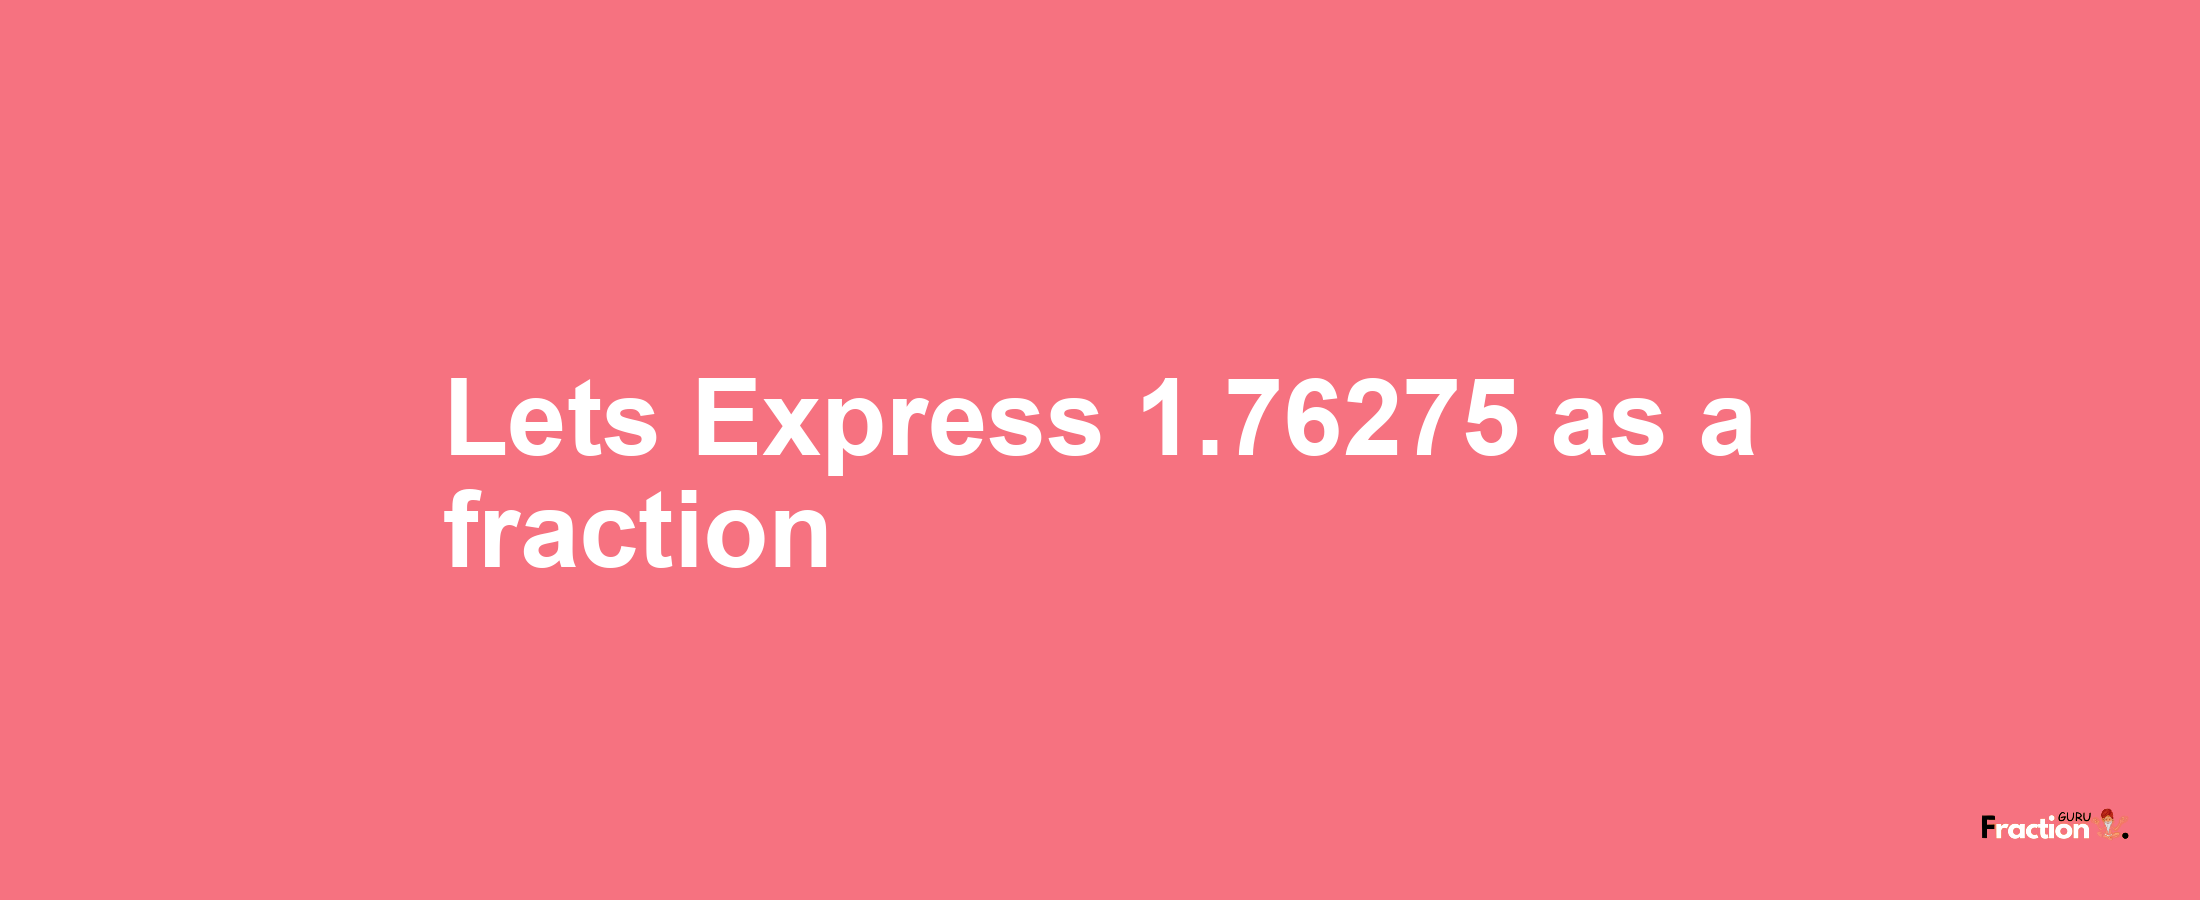 Lets Express 1.76275 as afraction